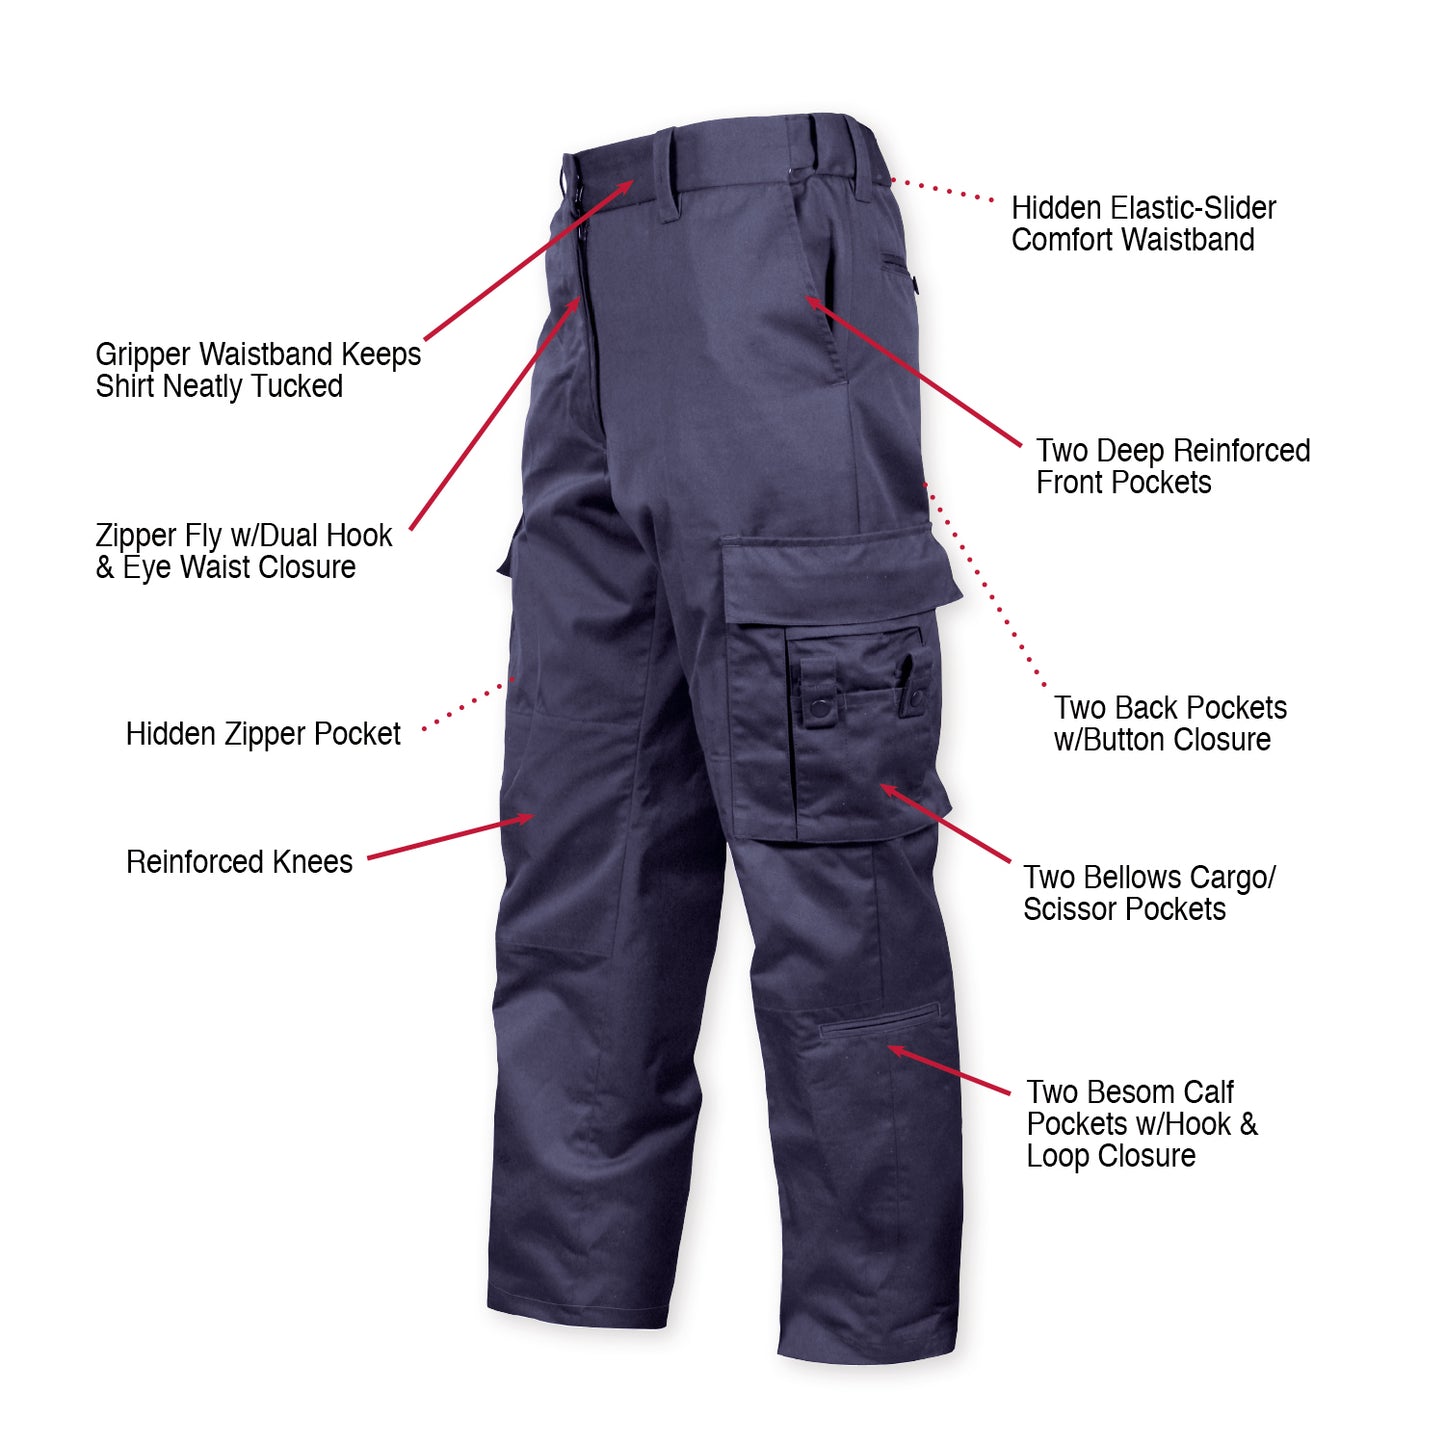 Rothco Deluxe EMT (Emergency Medical Technician) Paramedic Pants - Navy Blue